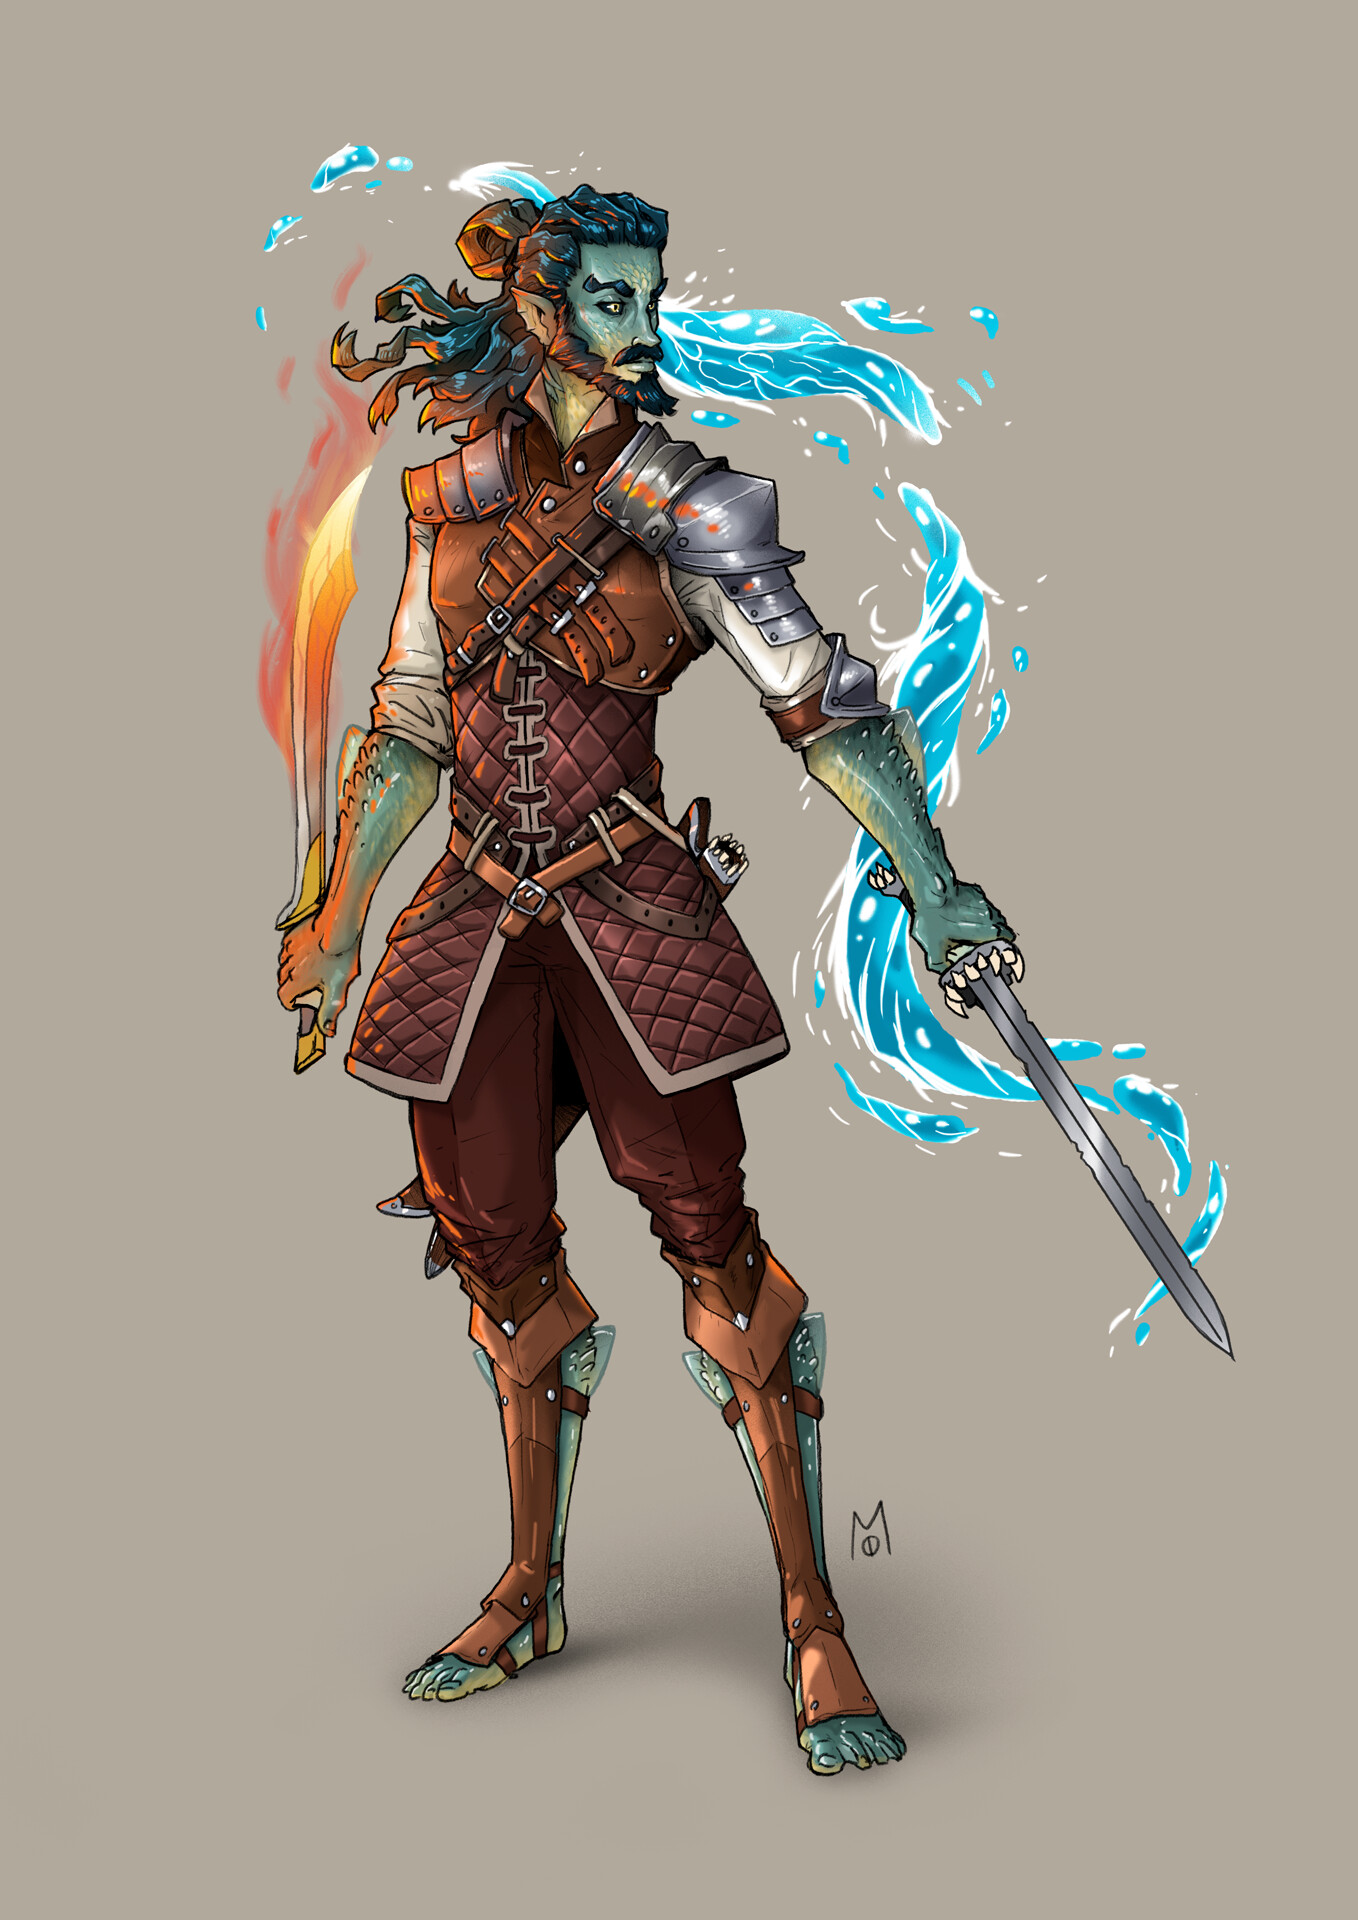 A commission of a water genasi ranger for D&D.